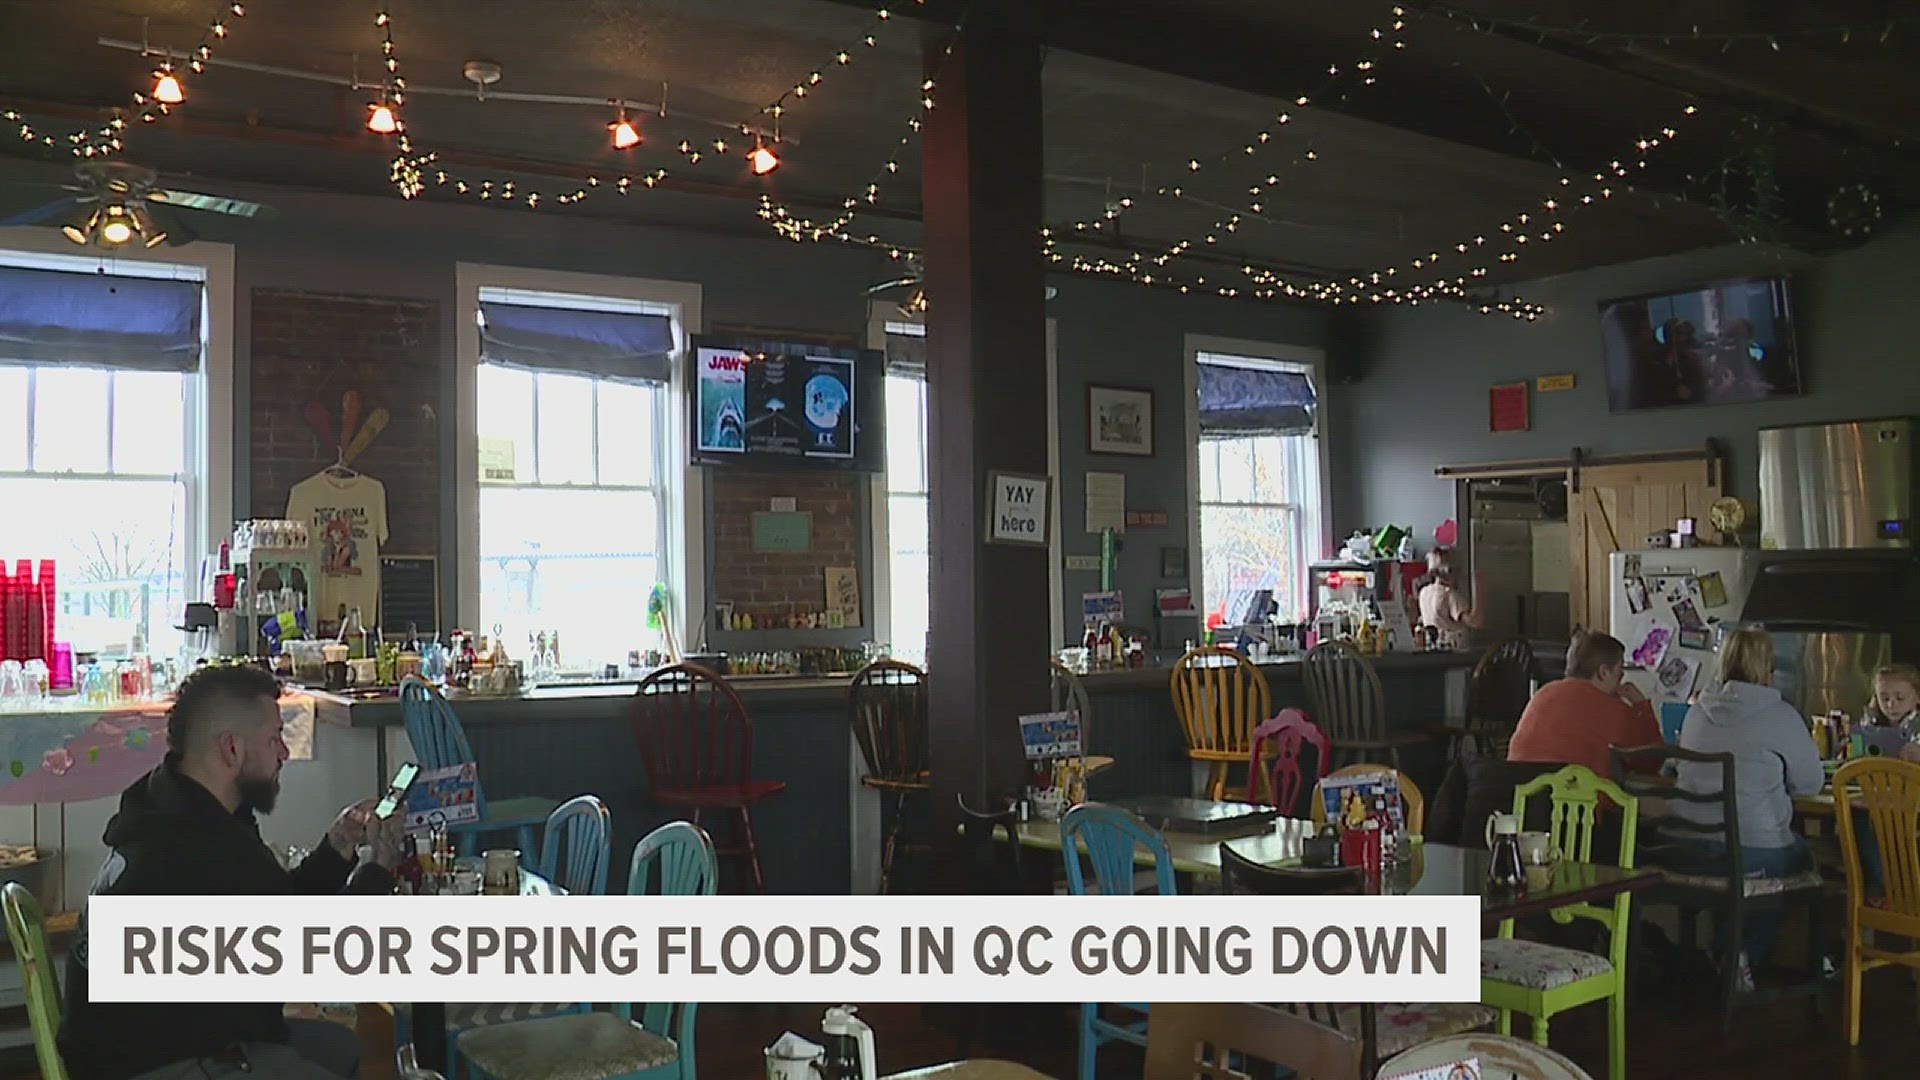 Owner of The Diner in downtown Davenport Tara Elkins says she's terrified of her business being effected again from another major flood.